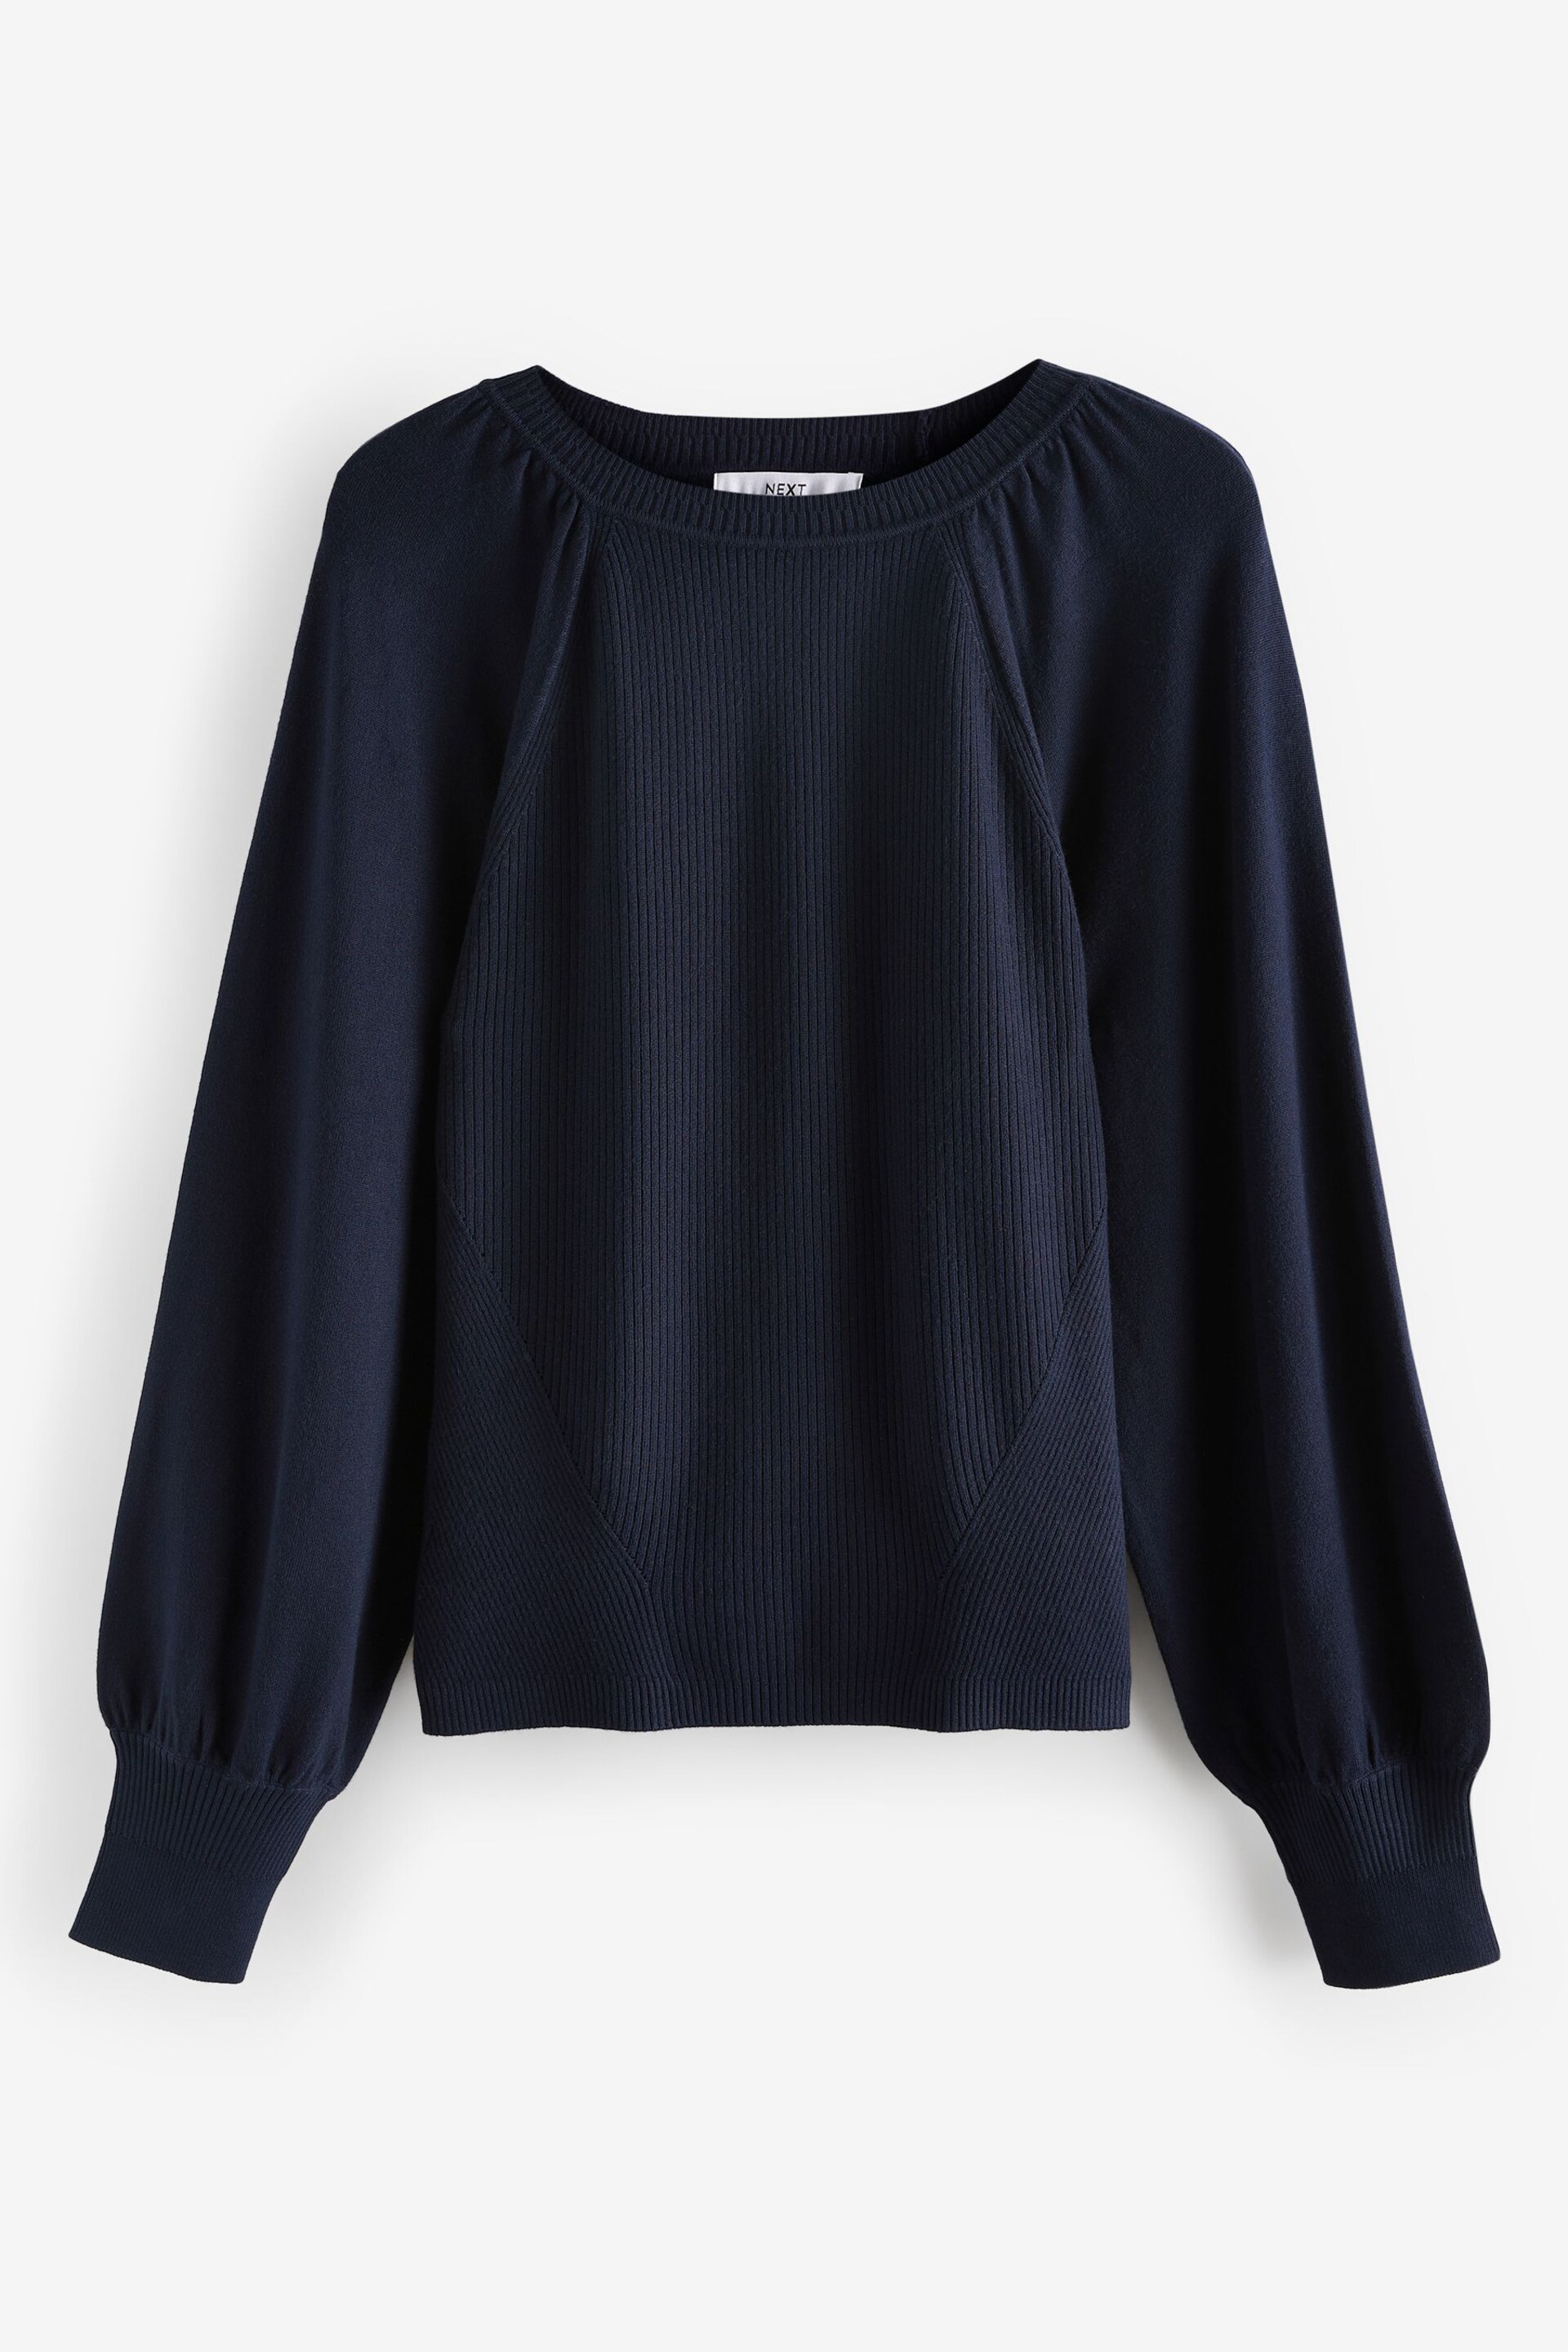 Navy Blue Puff Sleeve Jumper - Image 6 of 7